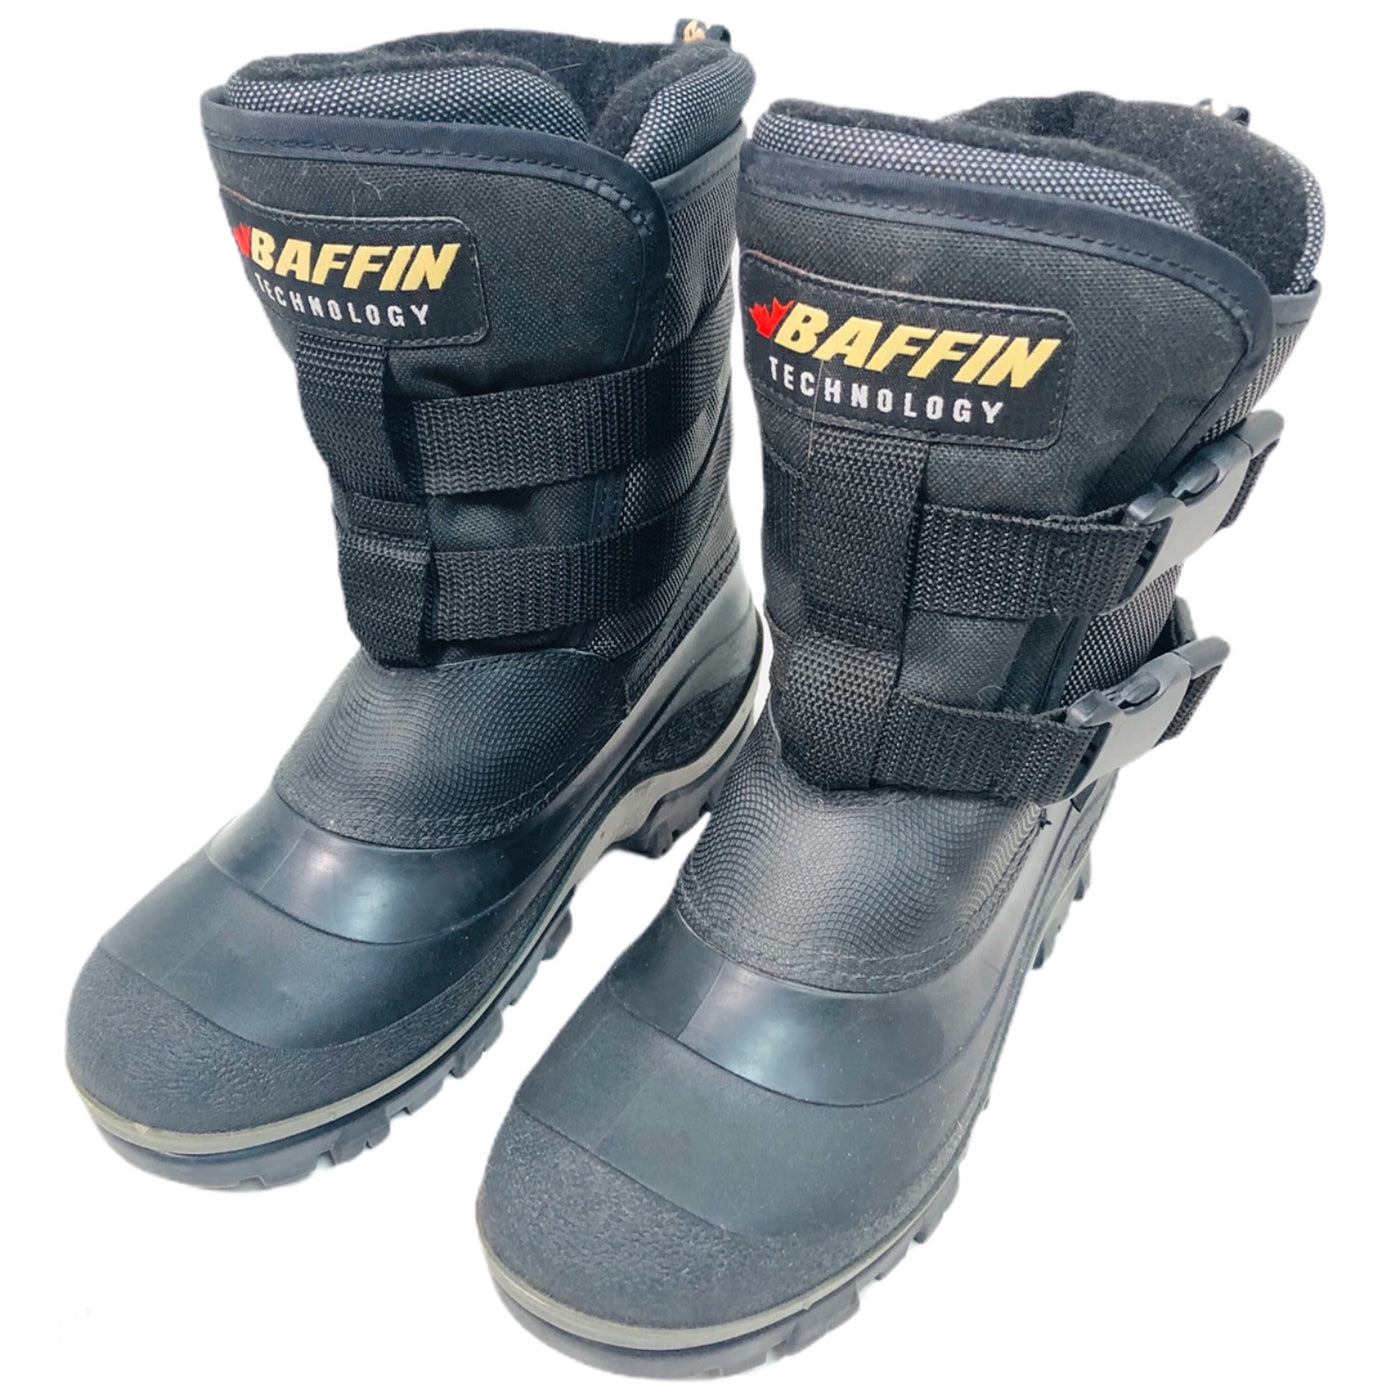 baffin technology snow boots